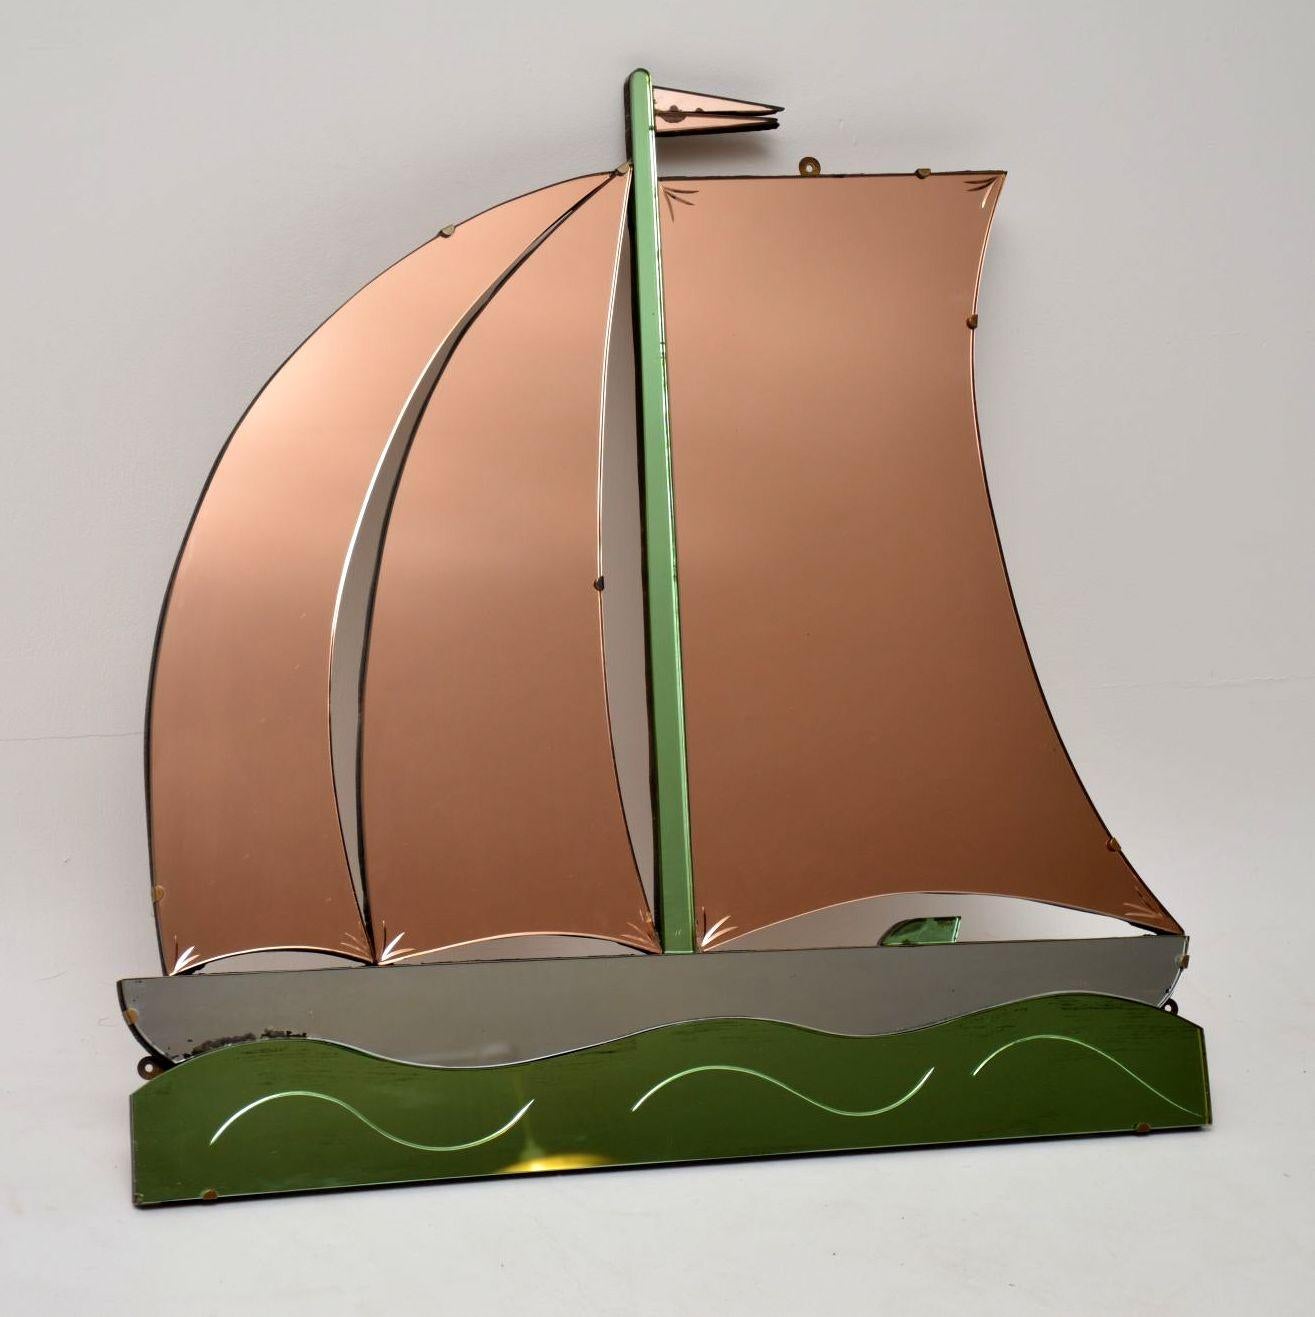 An absolutely stunning and very unusual vintage Art Deco period mirror in the shape of a boat, this dates from the 1920s-1930s. It’s in excellent original condition, with just some incredibly minor wear to the silvered backing on one or two edges.